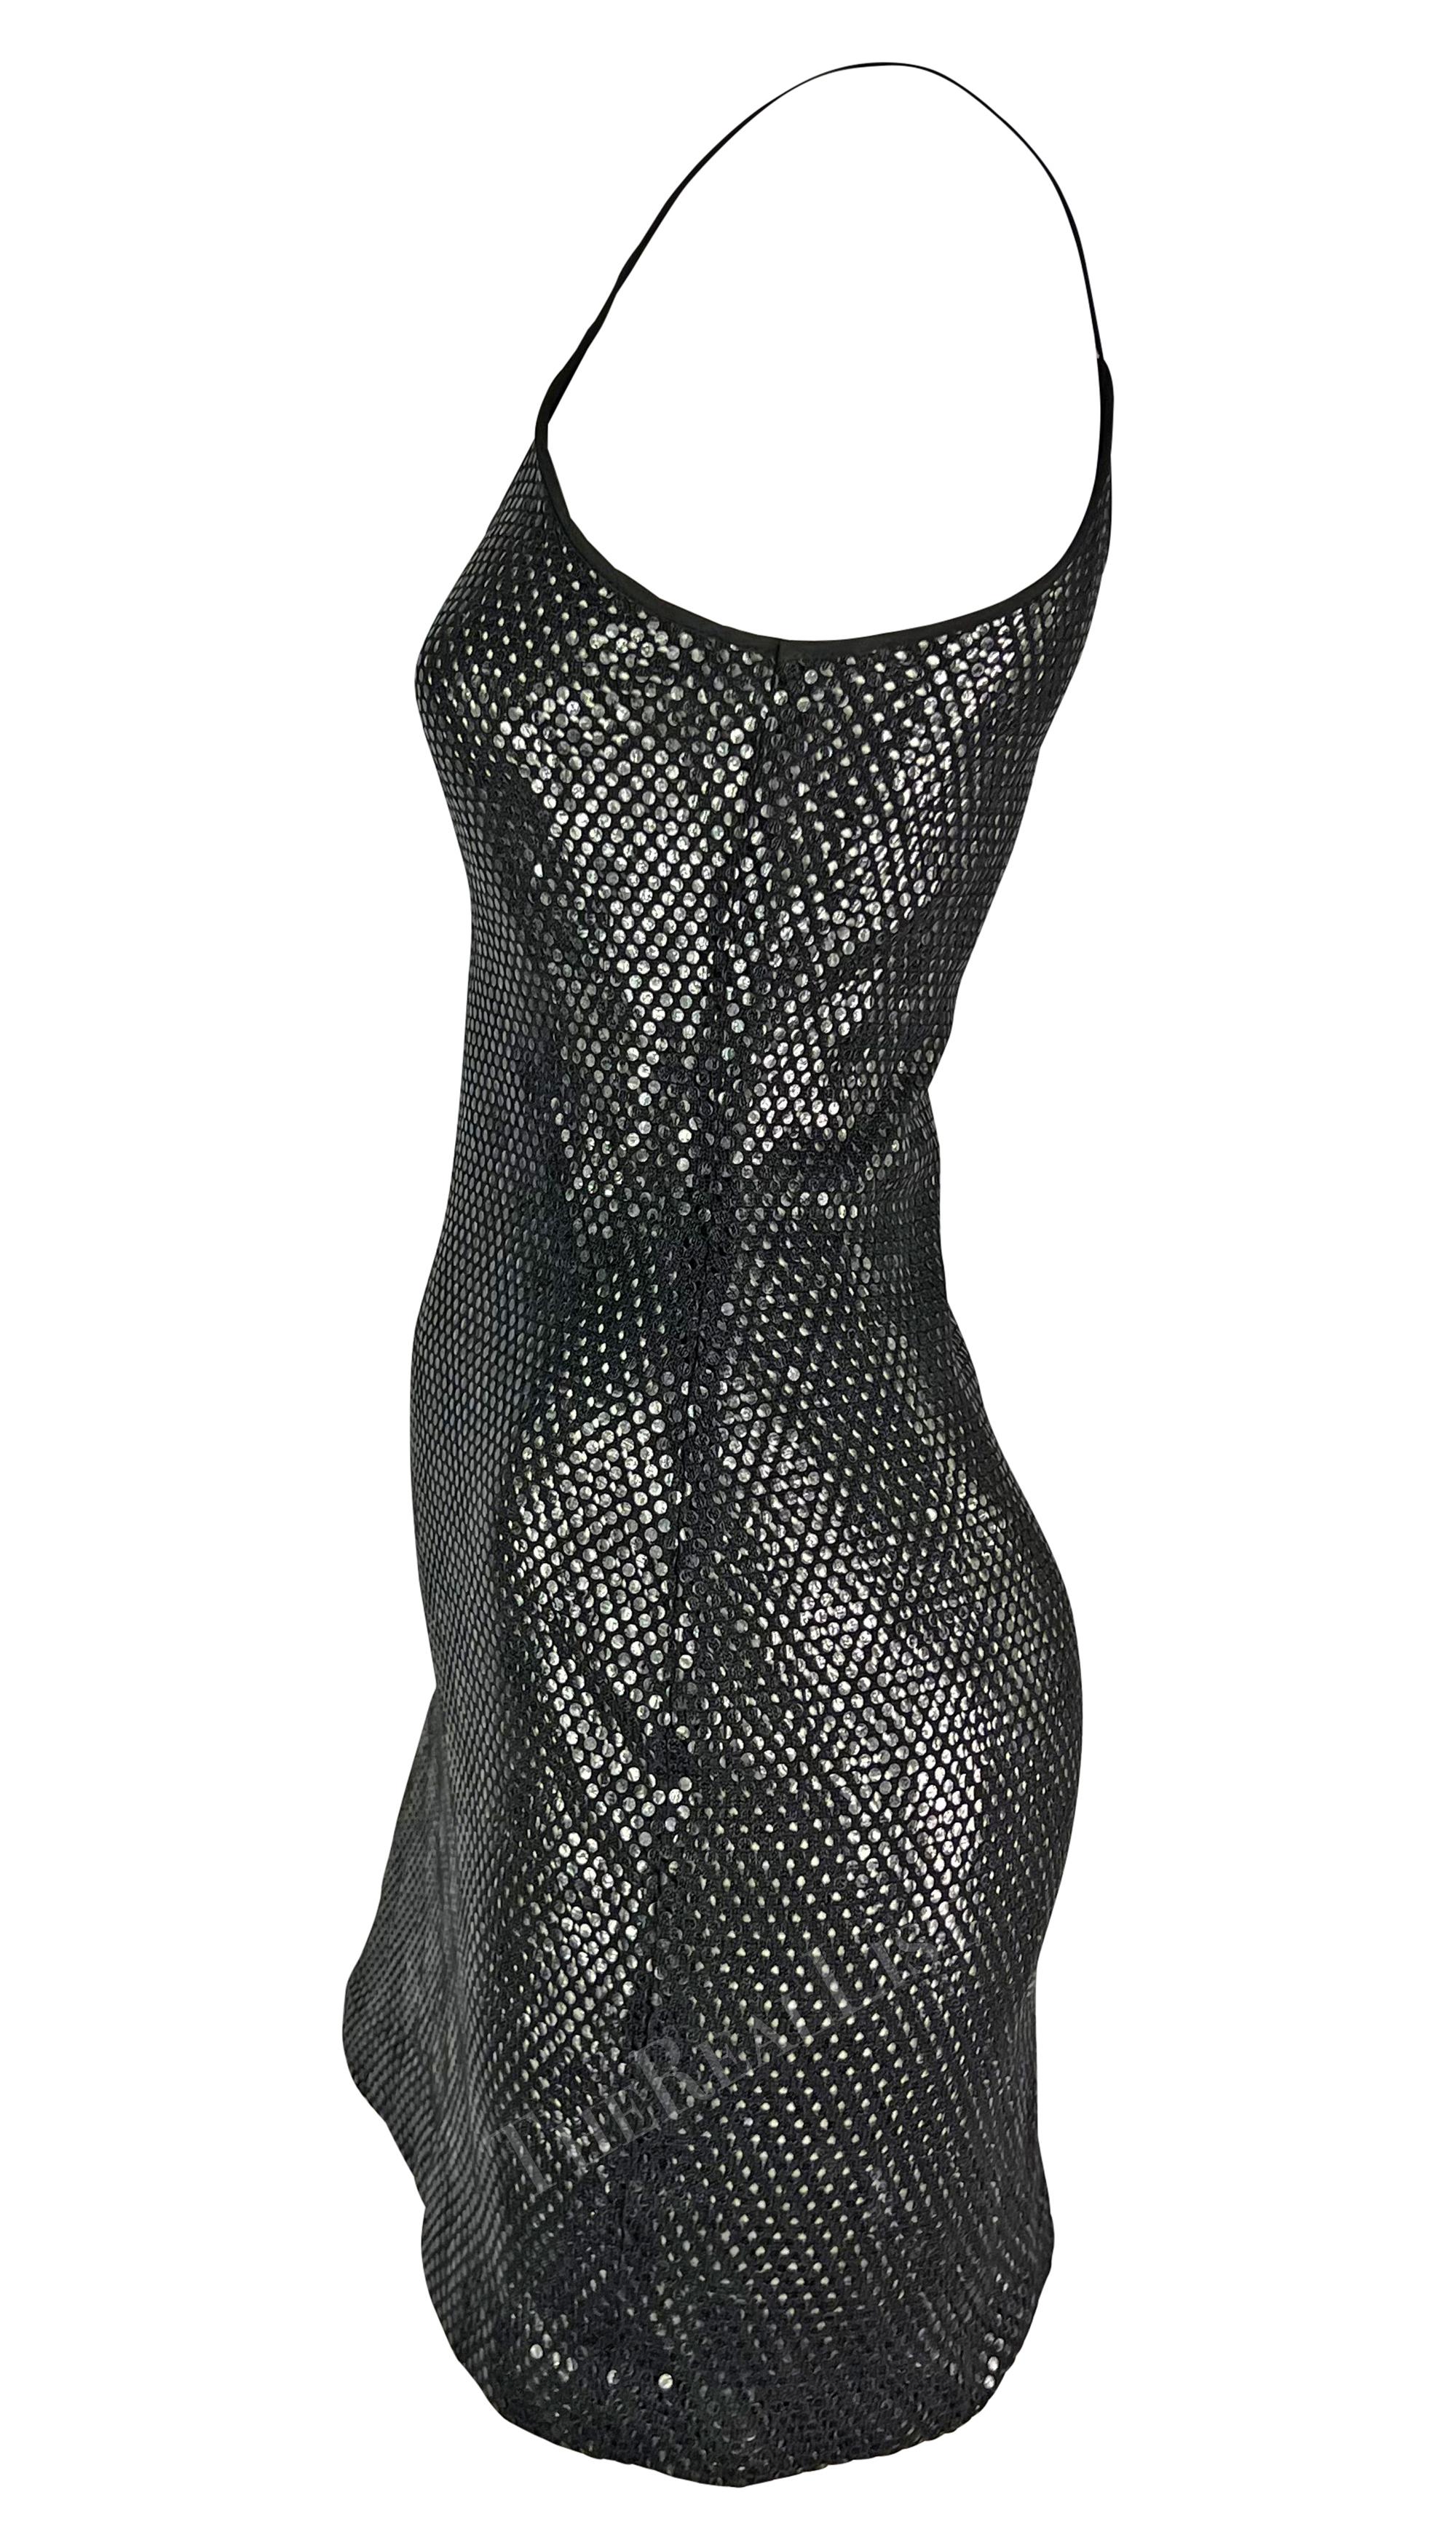 1990s Gianfranco Ferré Black Cutout Transparent Paillette Bodycon Mini Dress In Good Condition For Sale In West Hollywood, CA